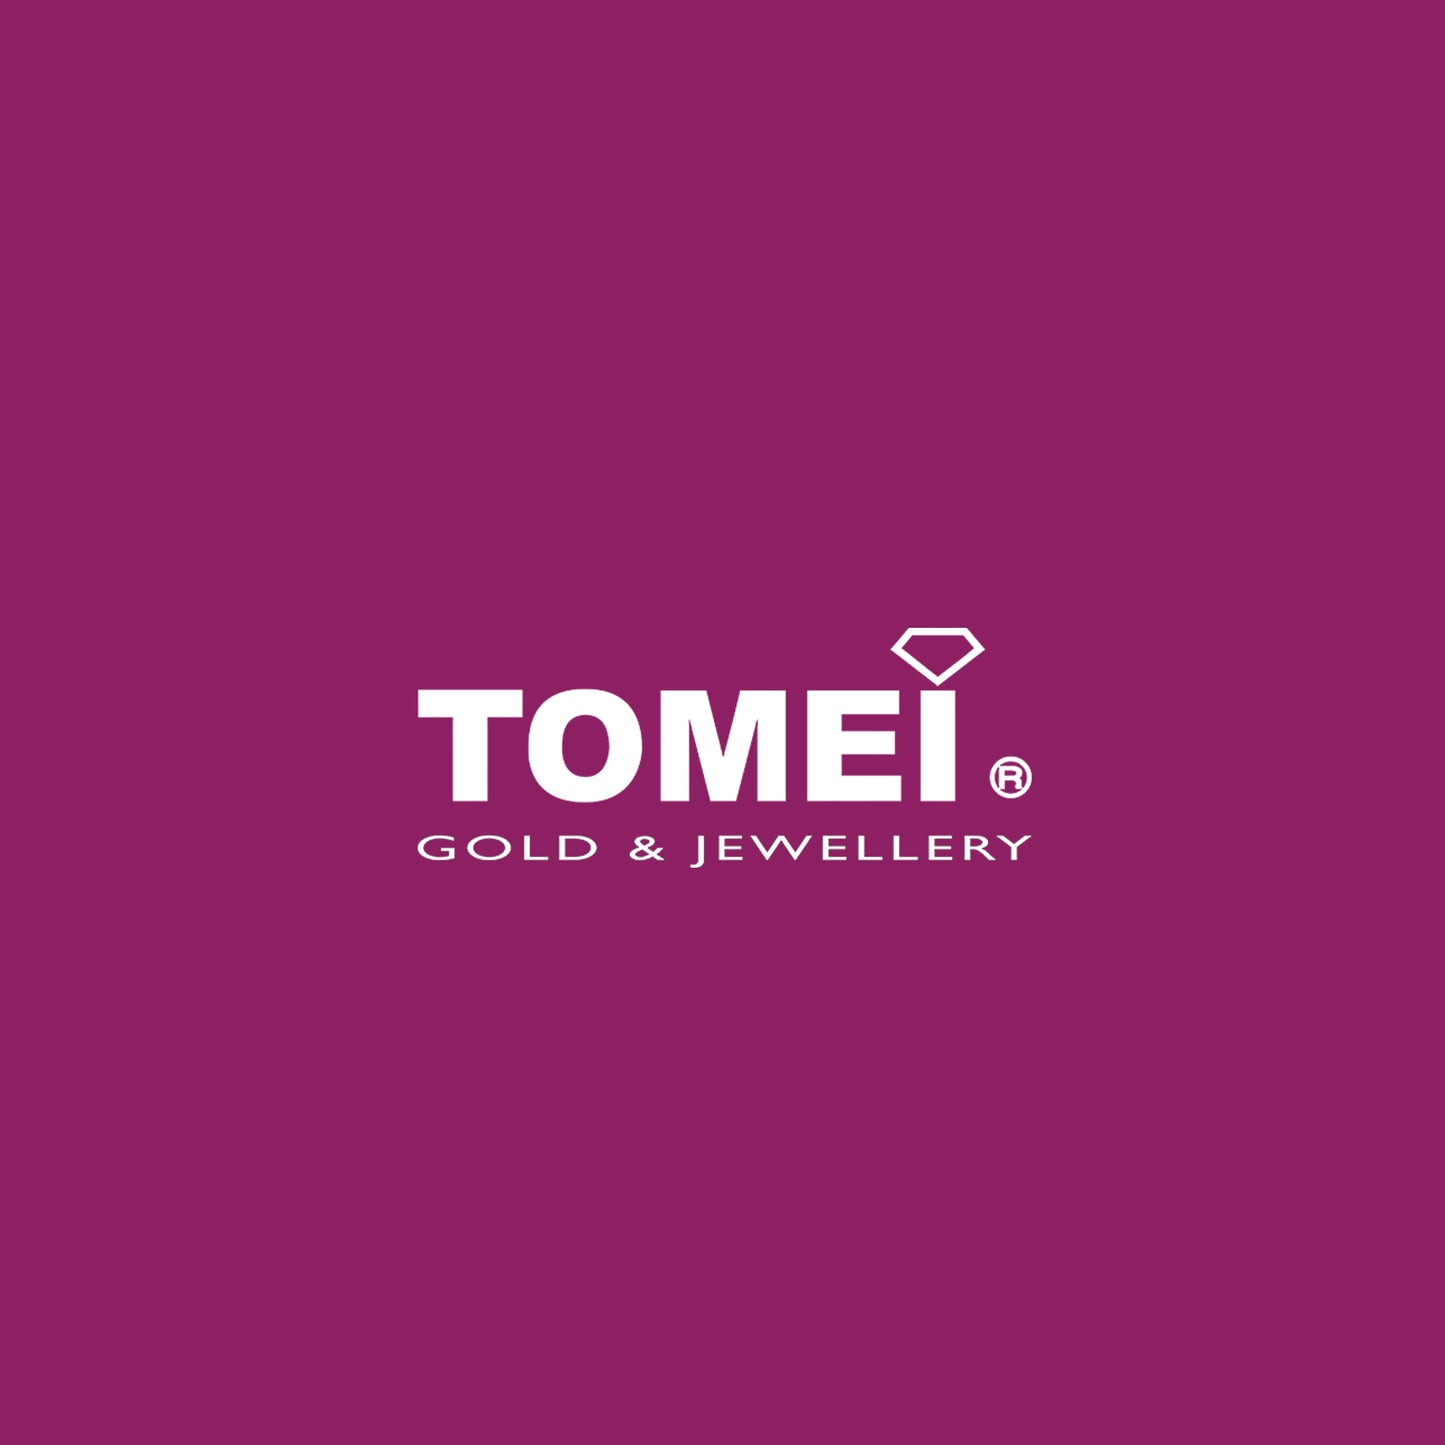 TOMEI Bracelet of Felicity in Style, Yellow Gold 916 (BB1099-A-2C)